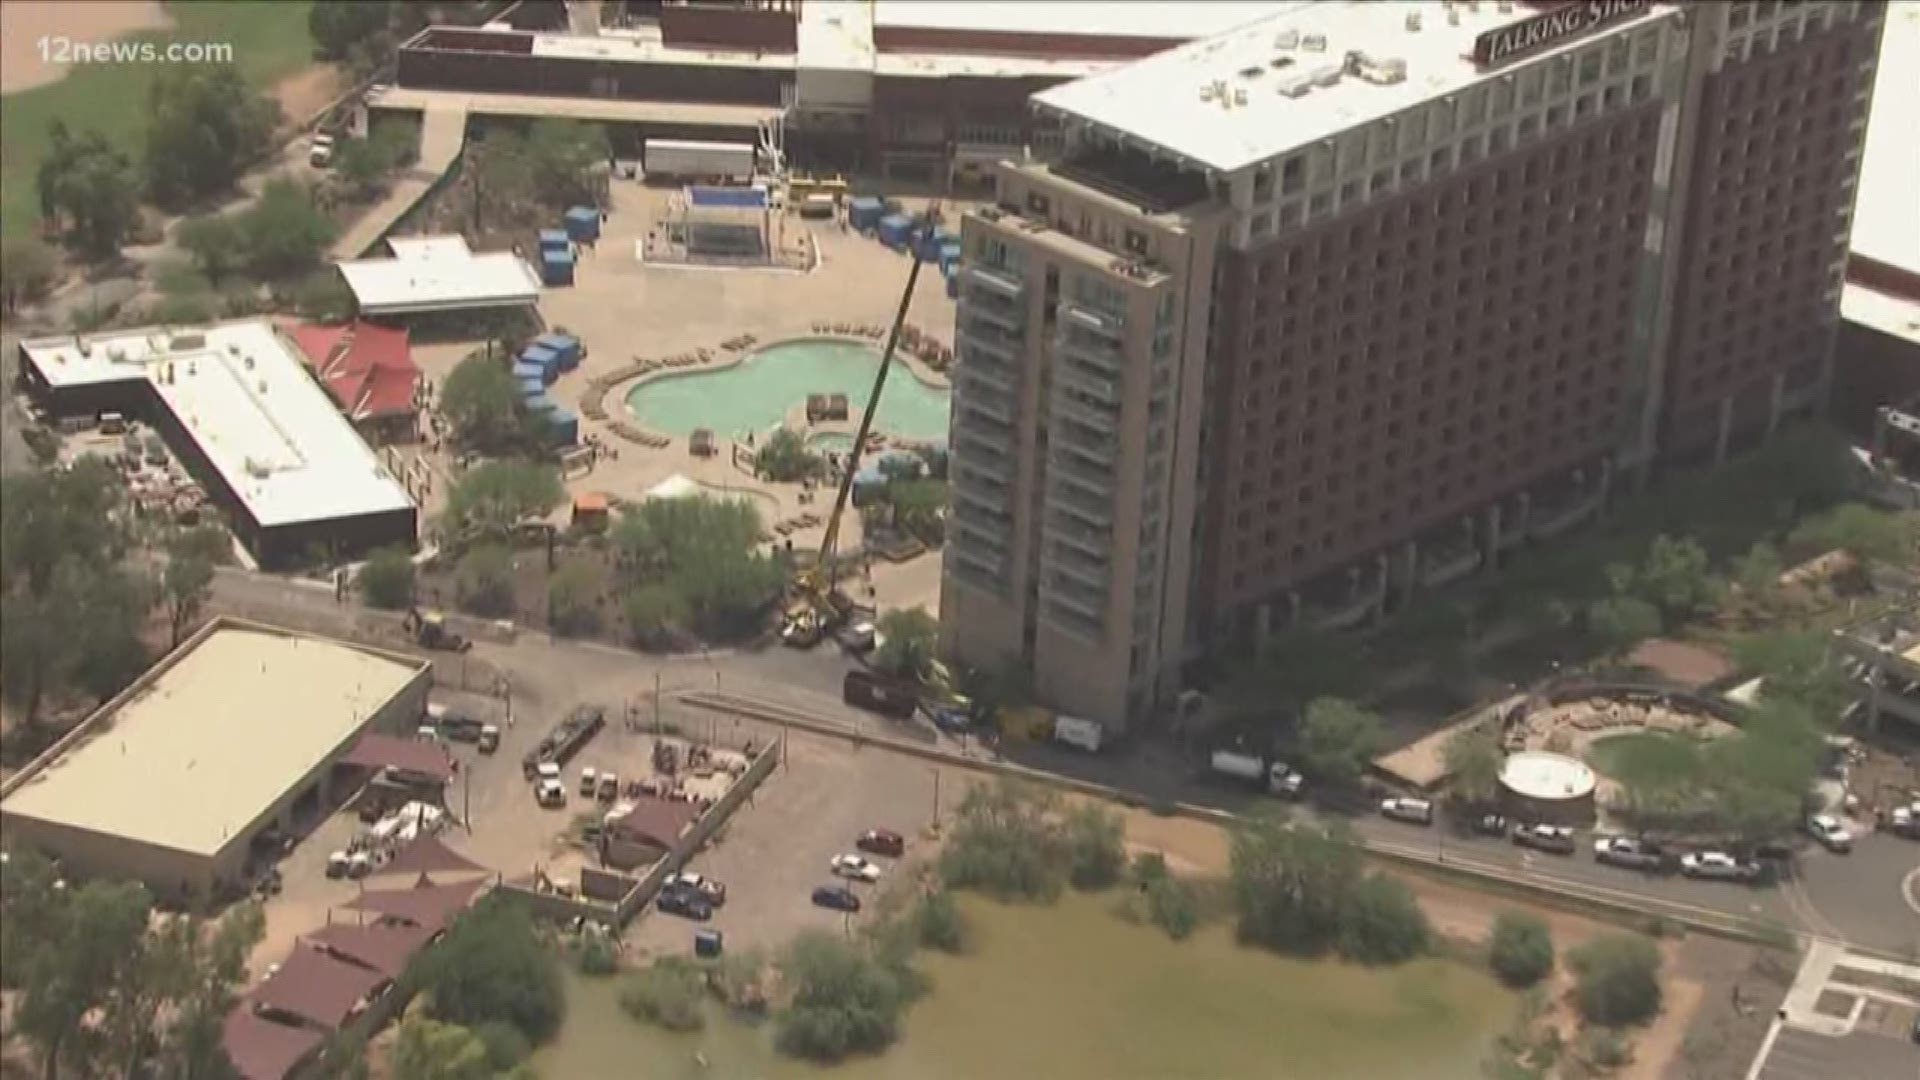 A powerful monsoon storm took out the power at Talking Stick Resort over the weekend. Many people were in the middle of their games when it happened. Power is still out and the resort isn't expected to re-open until Sunday.